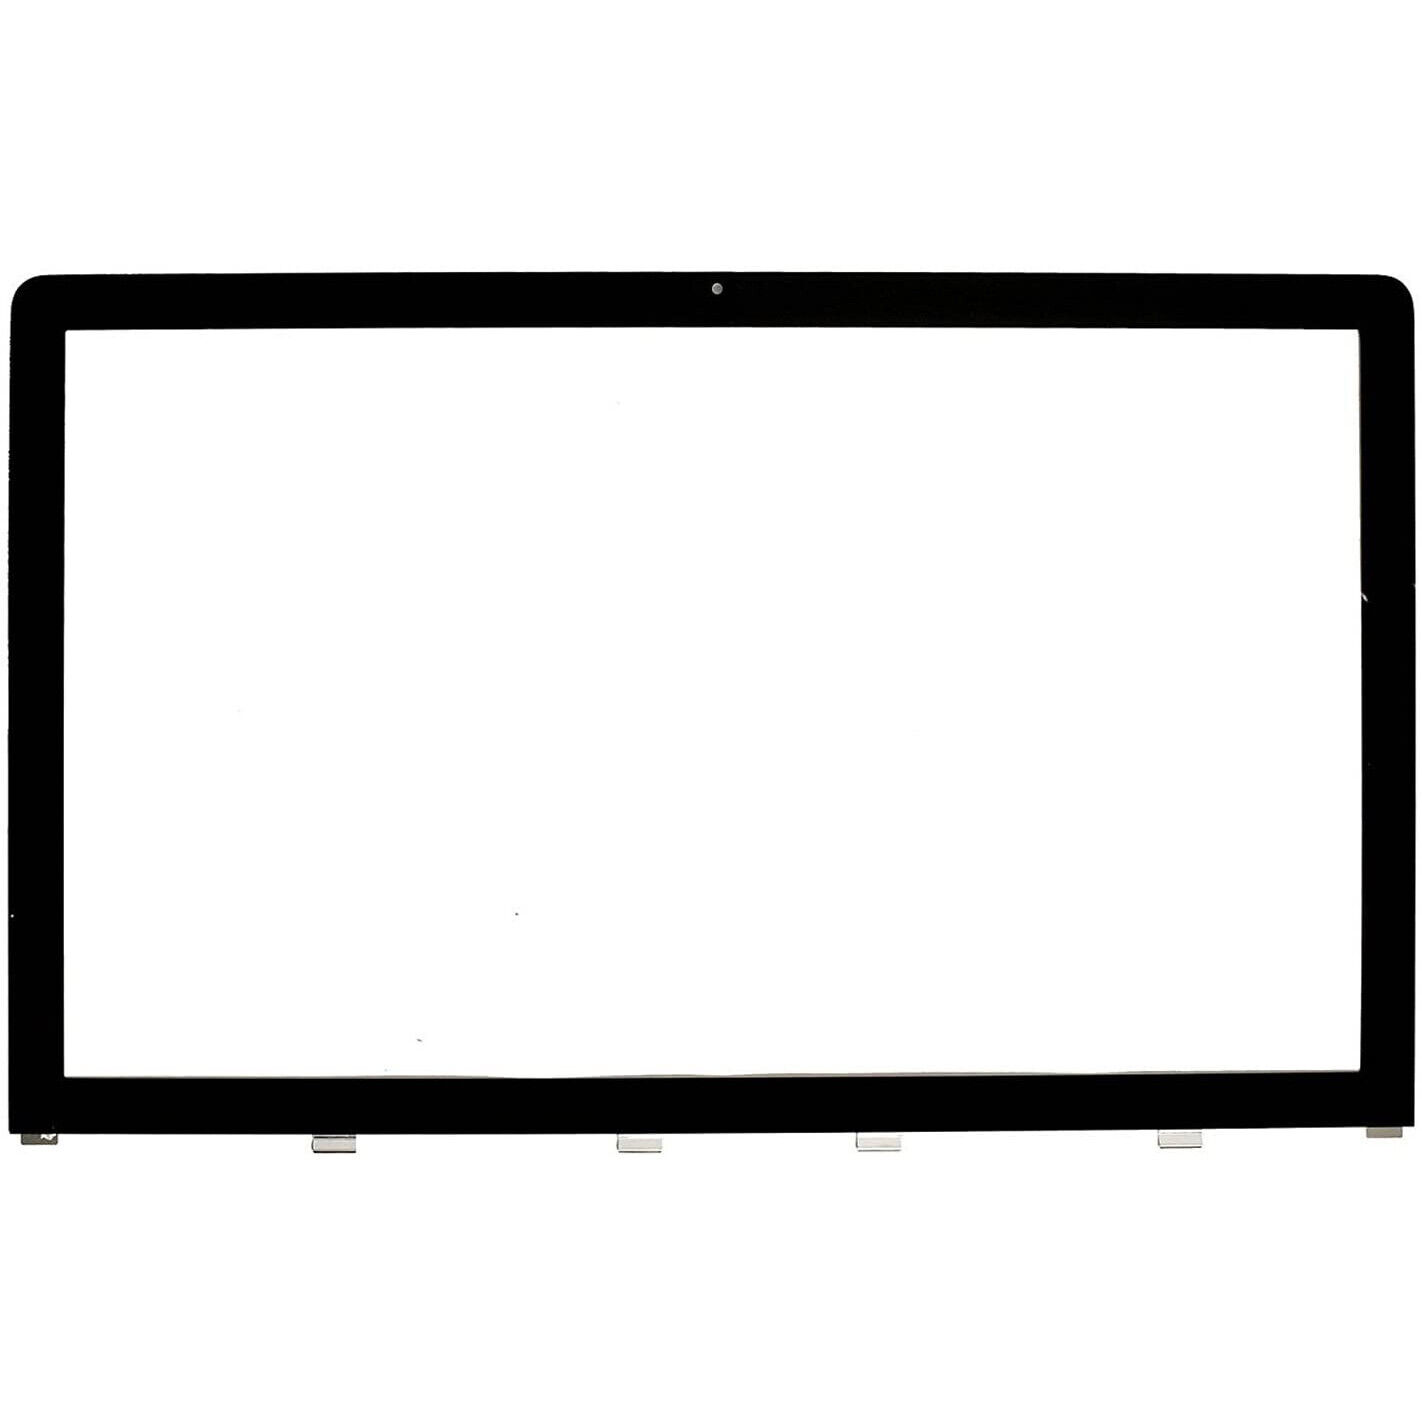 5pcs/lot A1225 Glass Panel LCD Front Glass for iMac 24 Inch 2007 2008 2009 Year